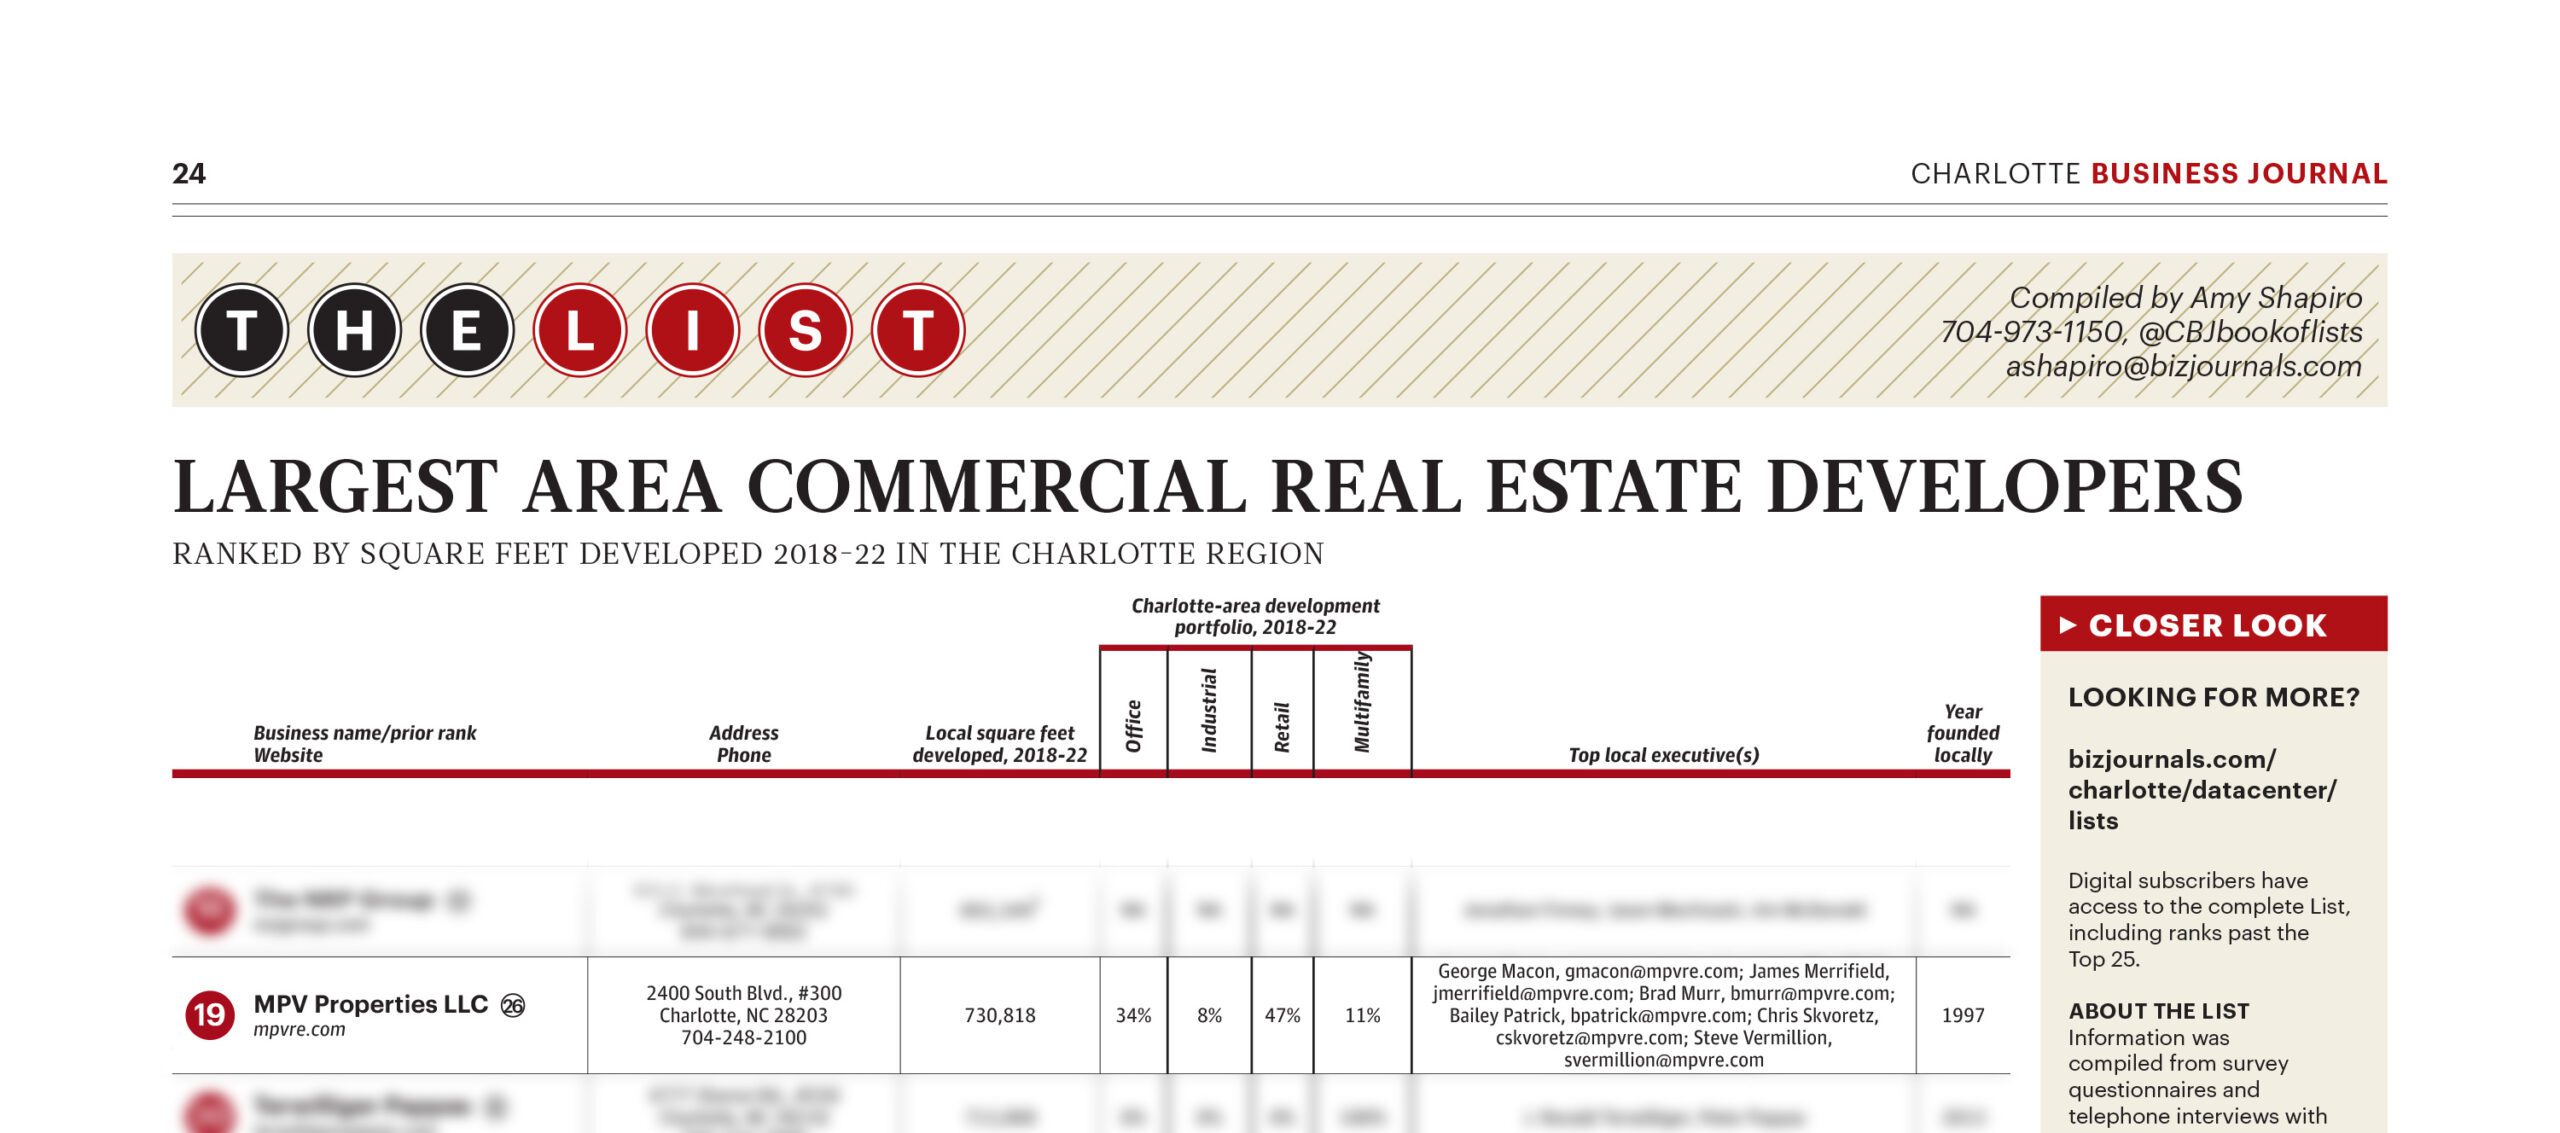 Charlotte Business Journal's List of Largest CRE Developers in the region with MPV at #19 for 5-year activity